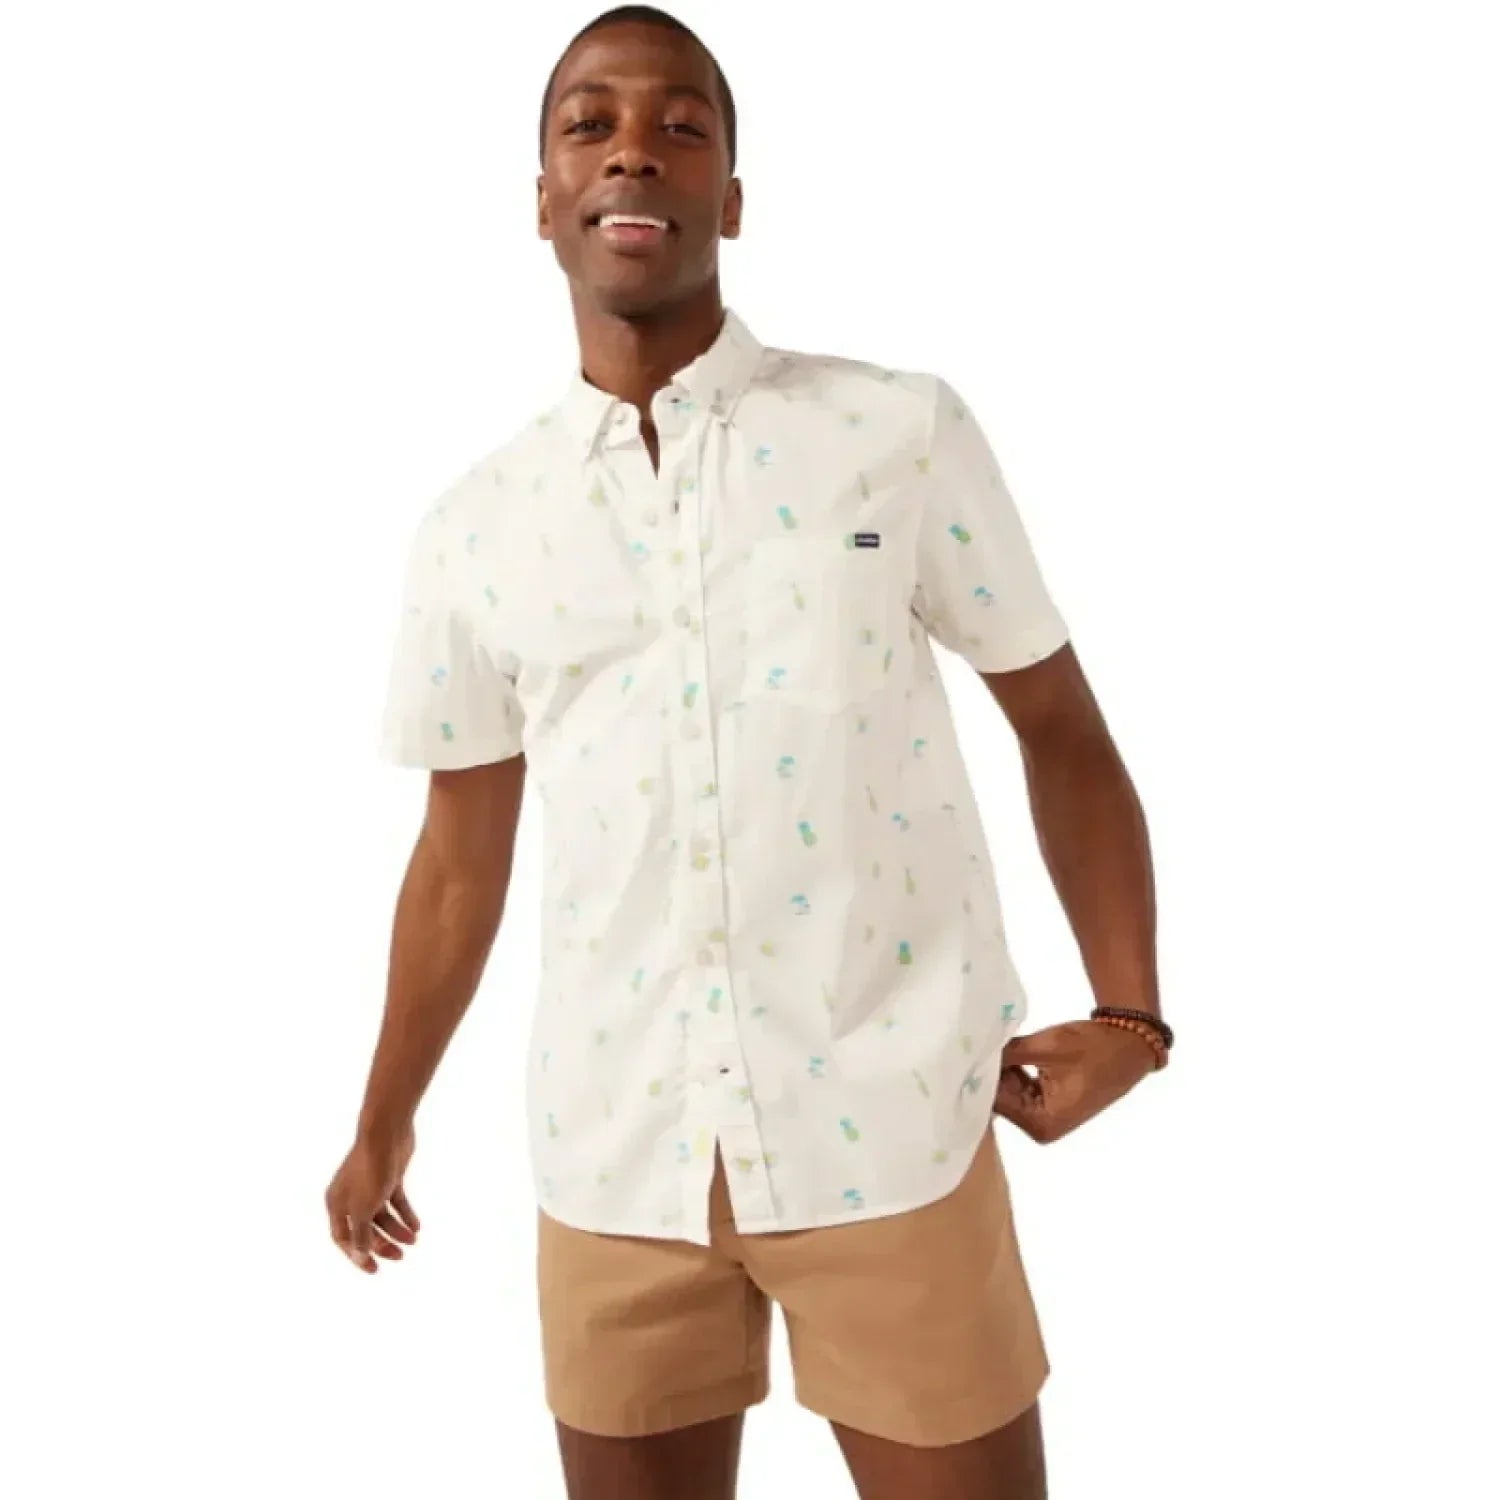 Chubbies 01. MENS APPAREL - MENS SS SHIRTS - MENS SS BUTTON UP Men's Friday Shirt THE STRAIGHT, NO CHASER